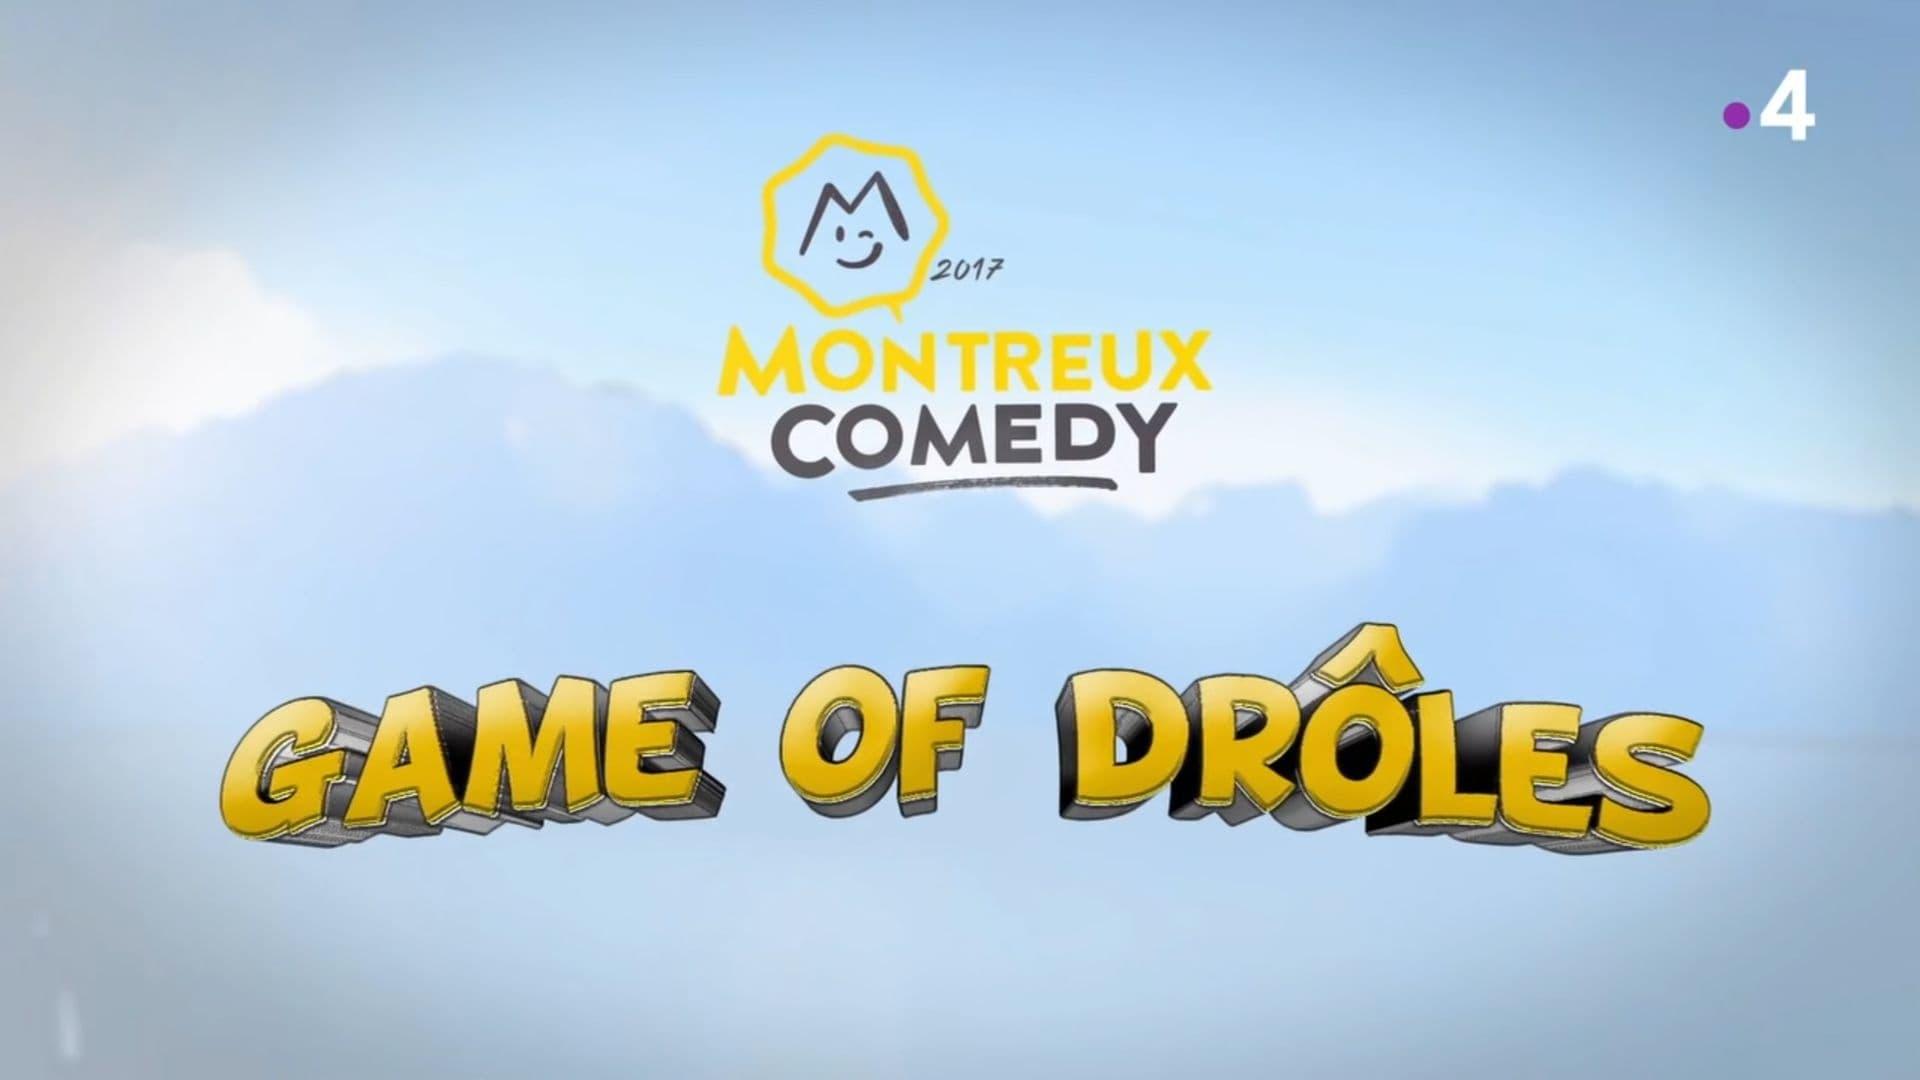 Montreux Comedy Festival 2017 - Game of Drôles backdrop